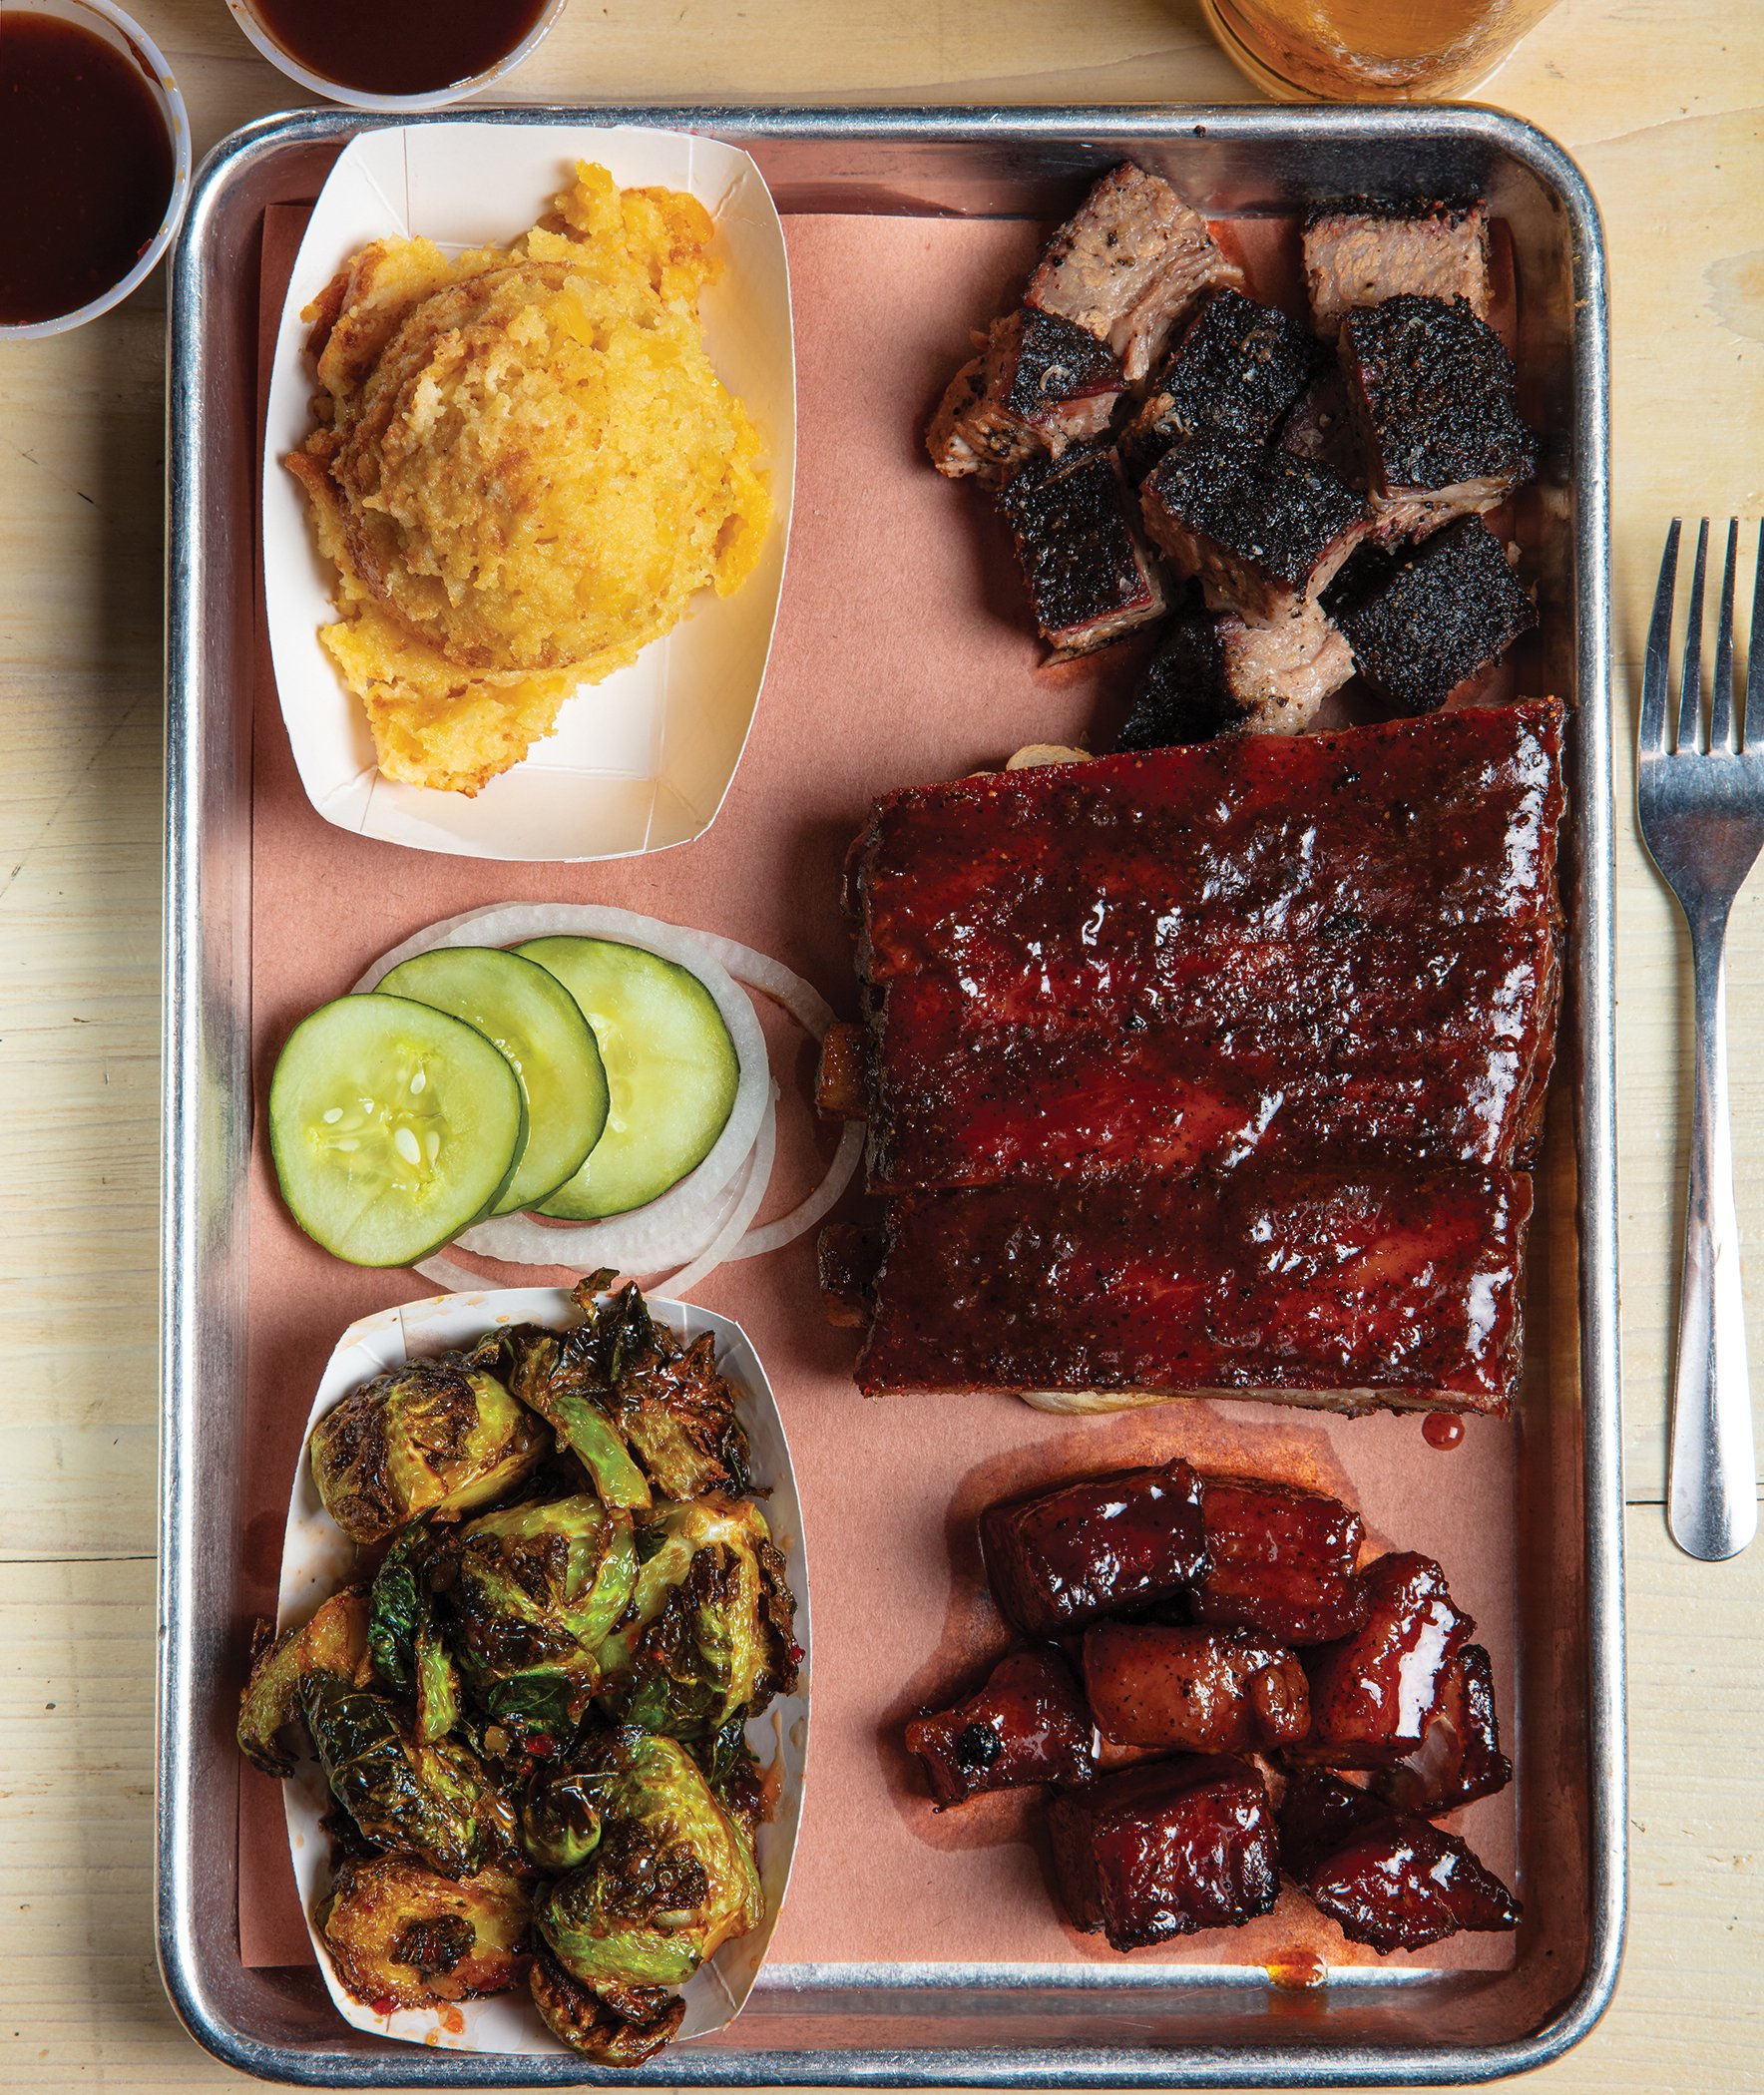 A succulent plate of beef ribs from Central City BBQ, showcasing the rich, smoky flavors and tender meat characteristic of New Orleans barbecue.